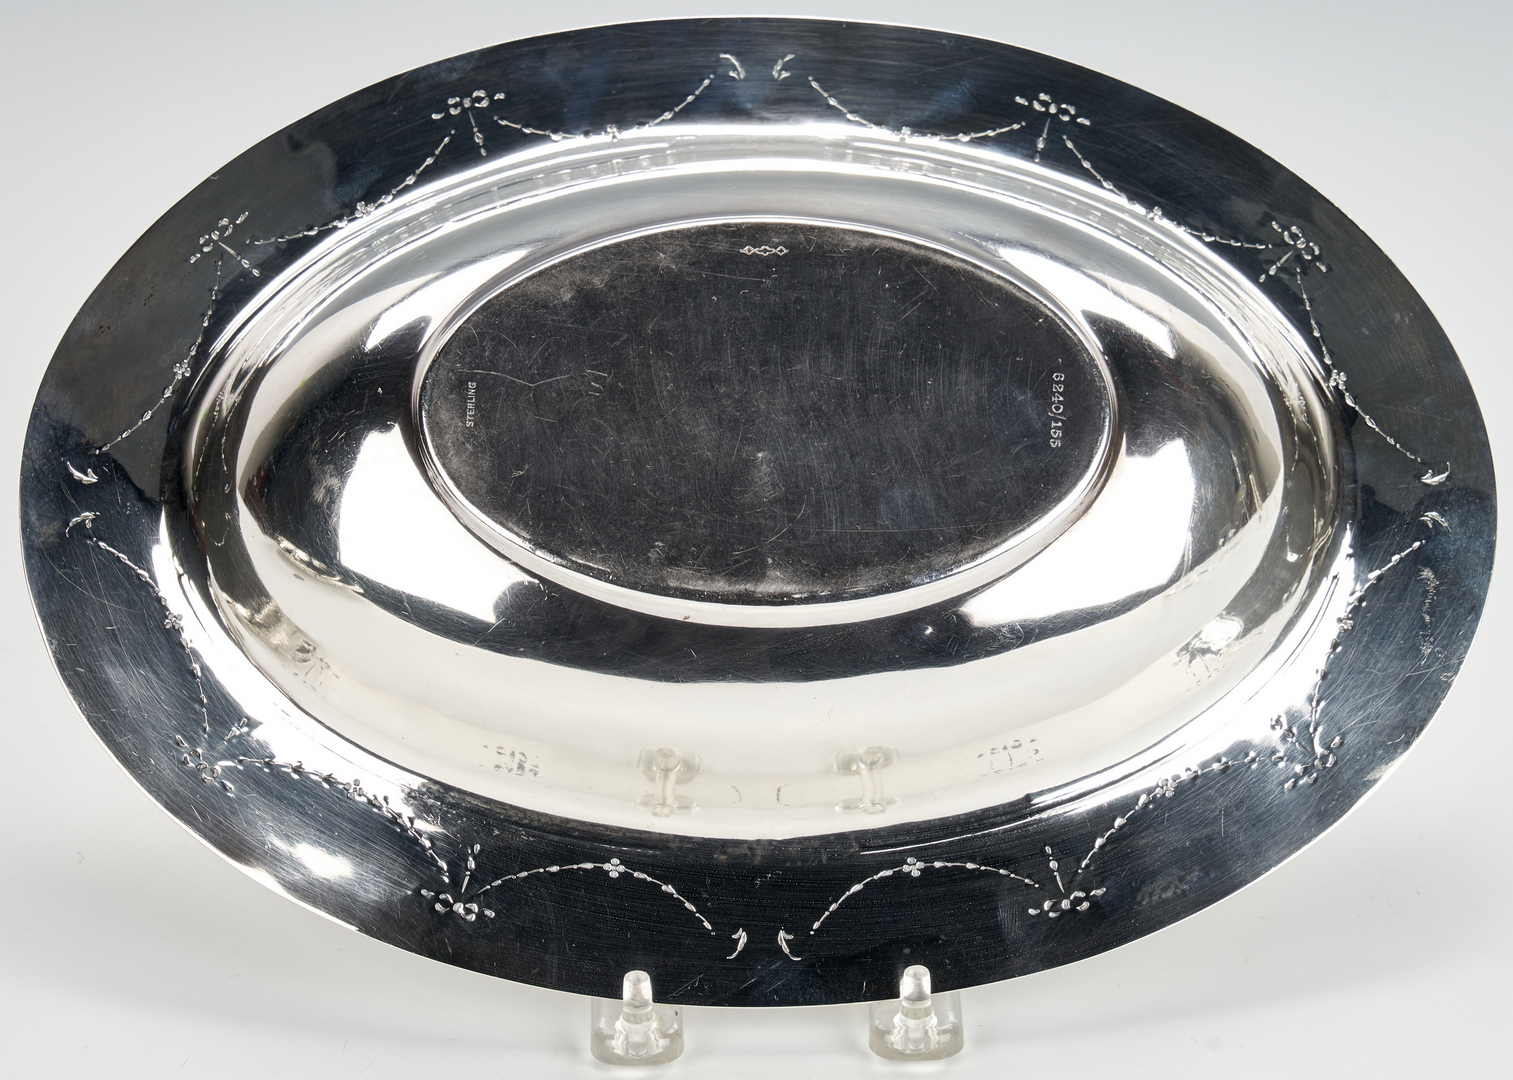 Lot 942: 4 Sterling Silver Bowls/Trays, incl. Wallace, Dominick & Haff, International